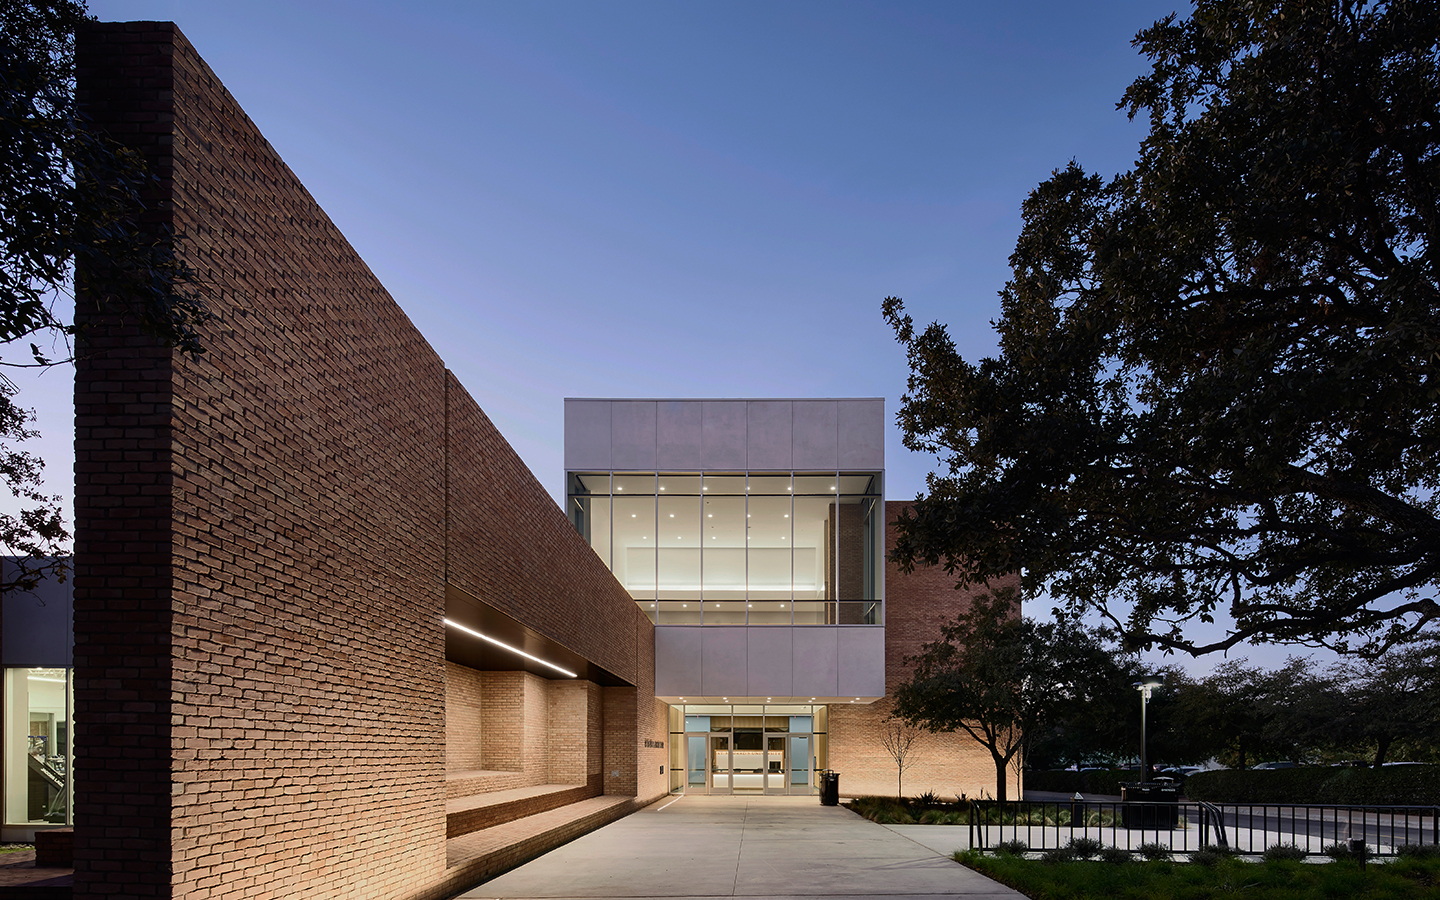 Exterior at dusk of the Recreation and Athletic Center by Specht Novak Architects. Shot by Andrea Calo.